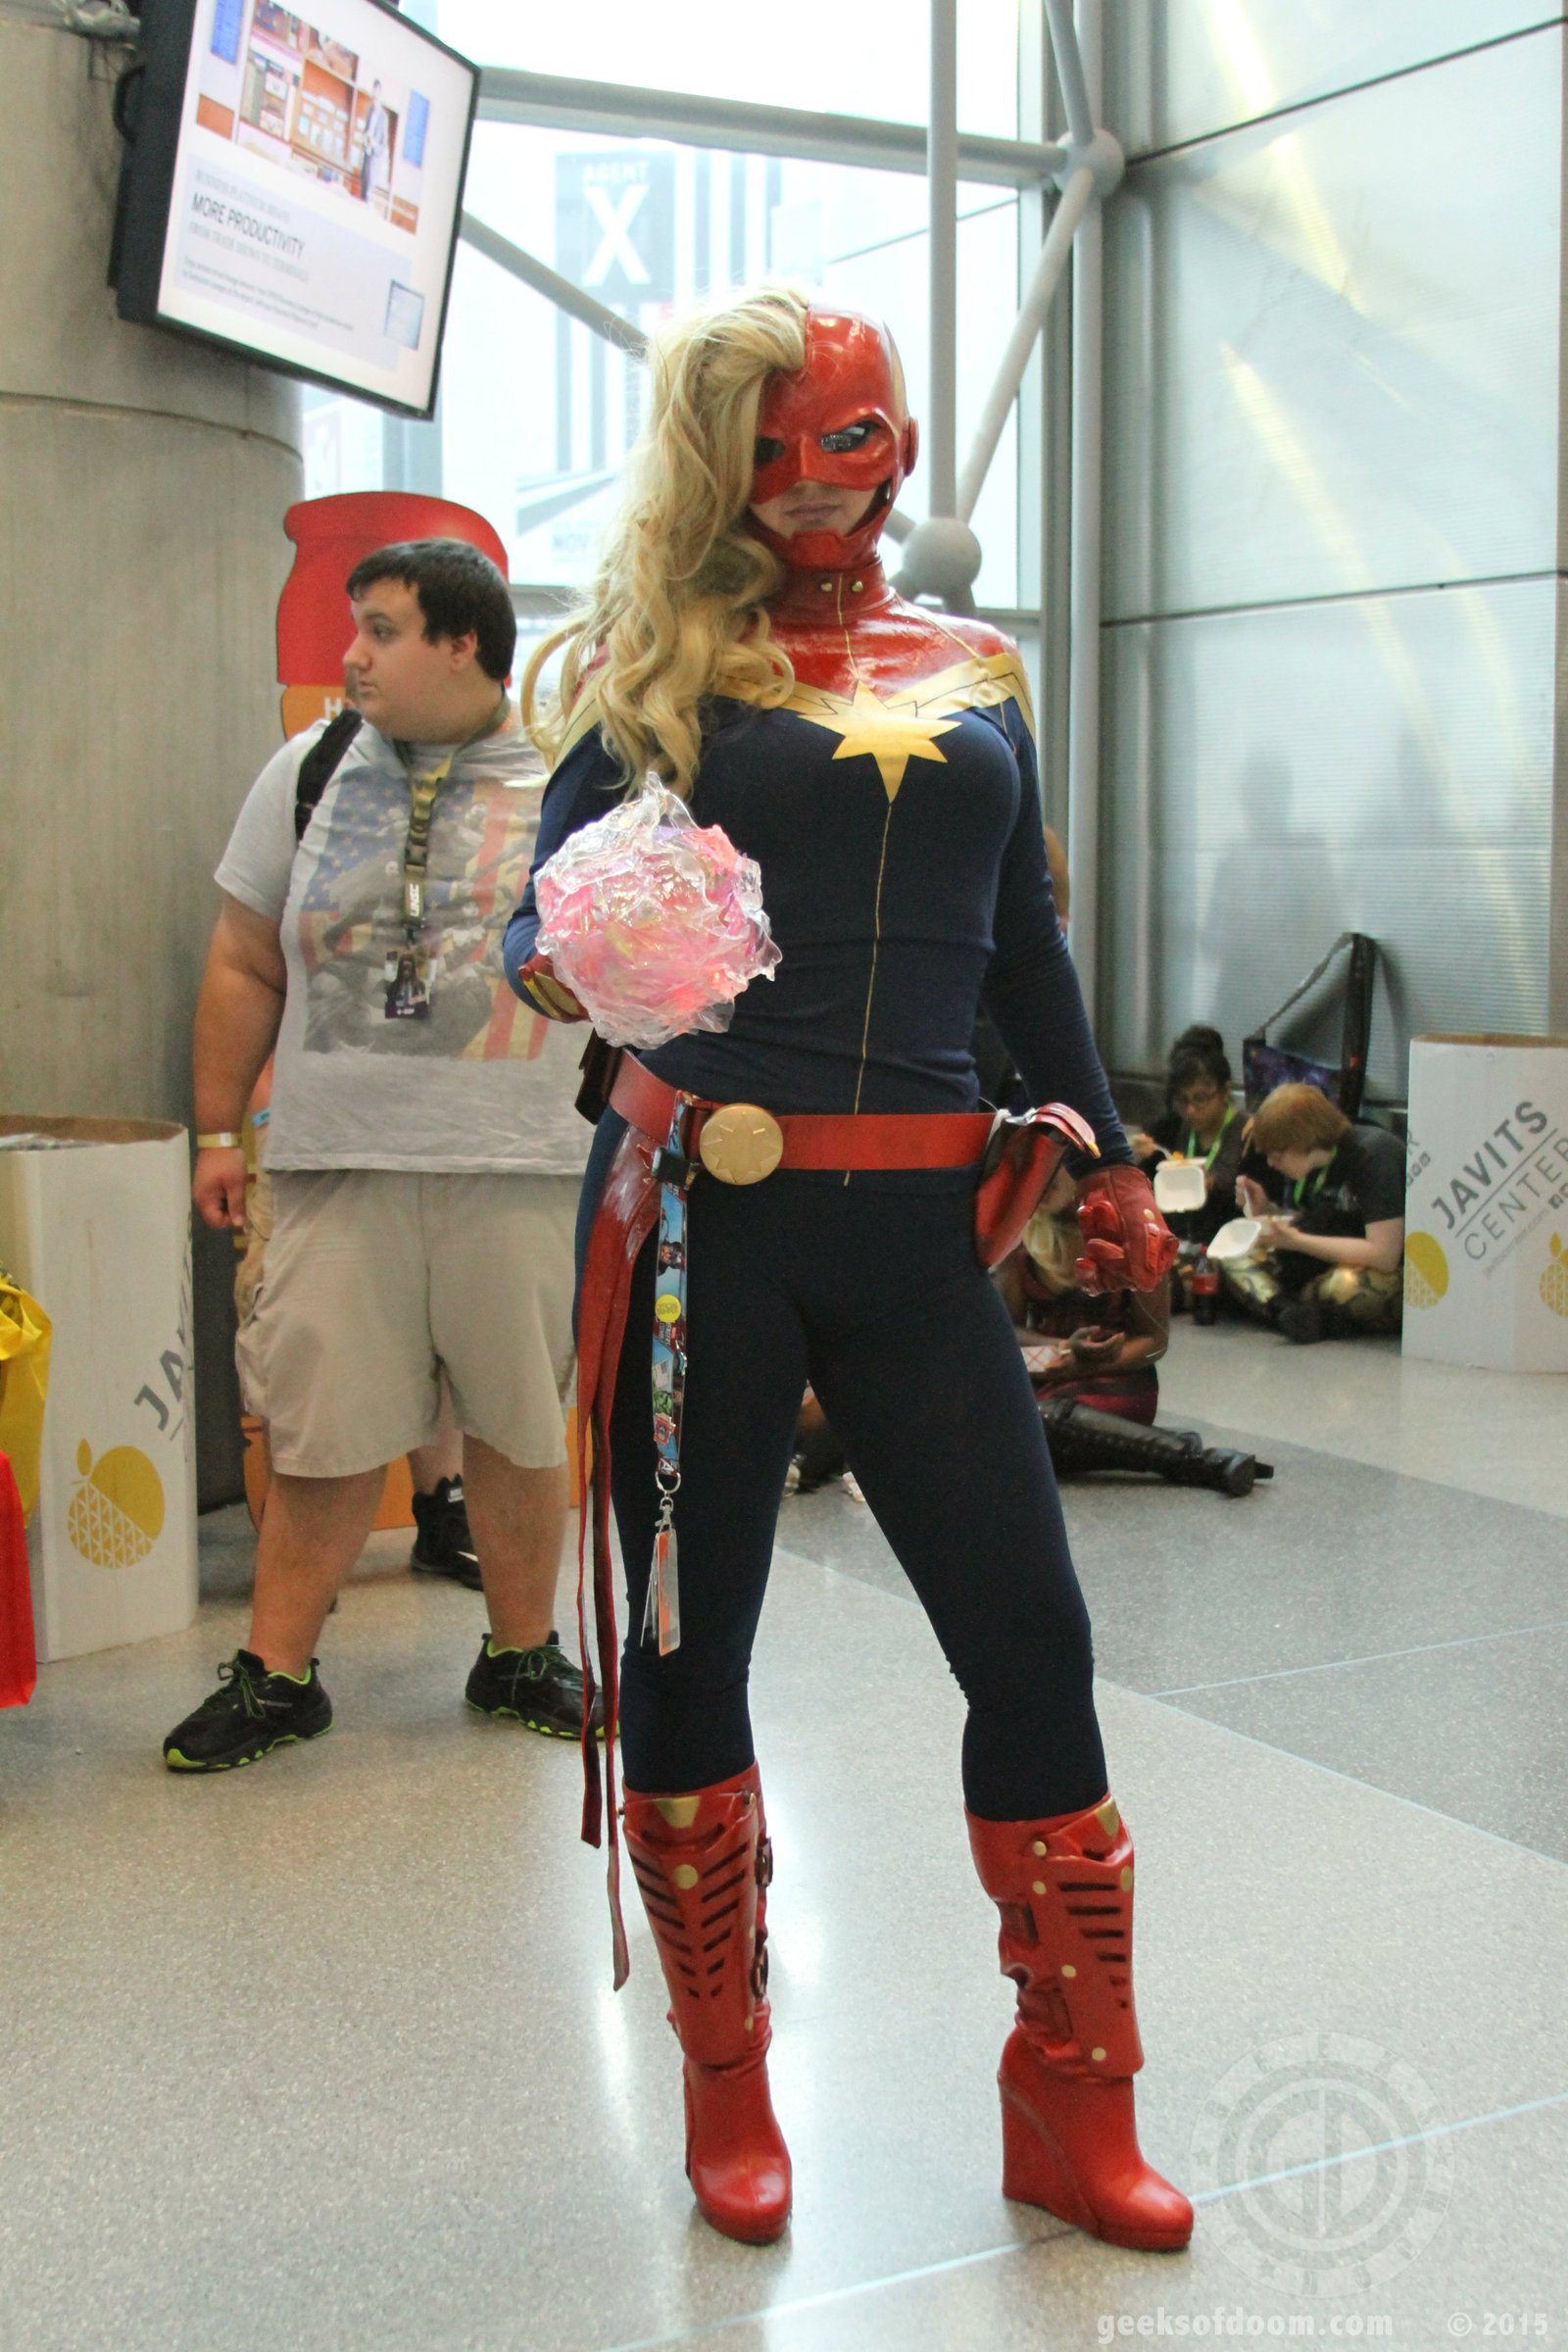 NYCC 2015: Cosplay and Convention Floor Photos3456 x 5184